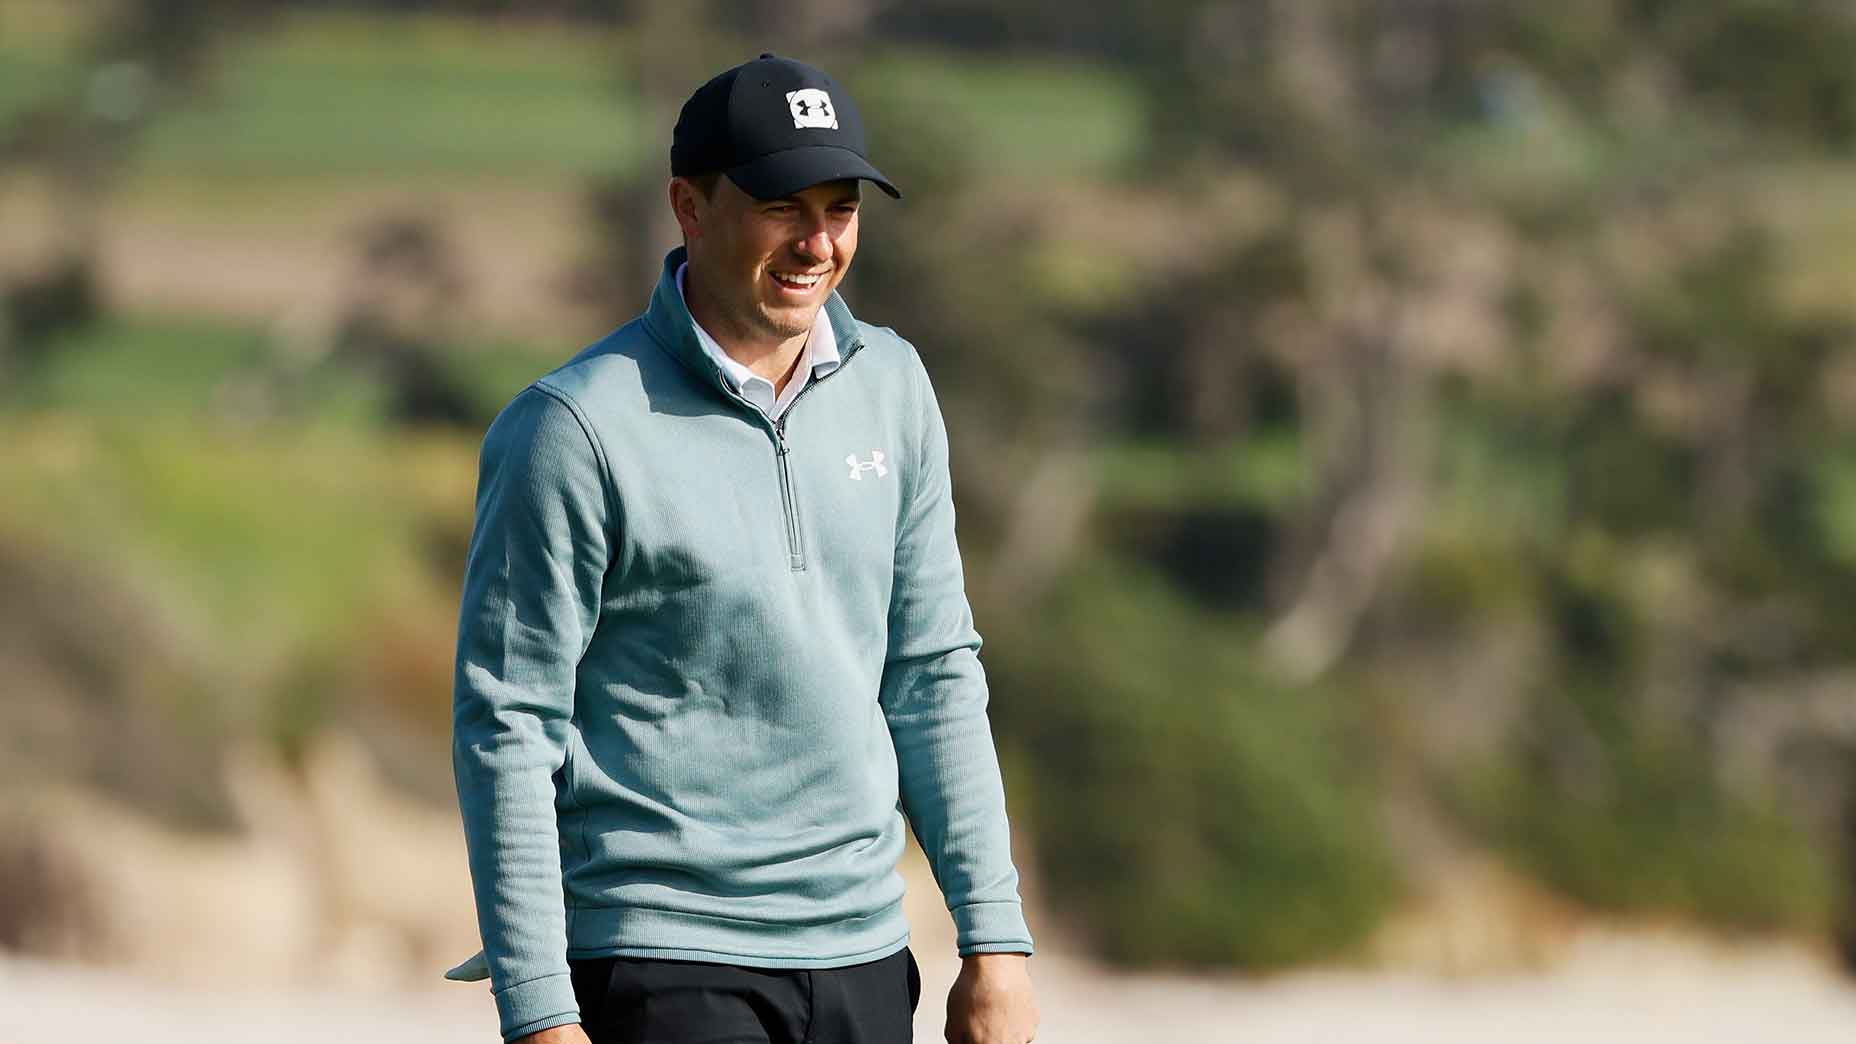 2021 ATandT Pebble Beach Pro-Am live coverage How to watch on Sunday